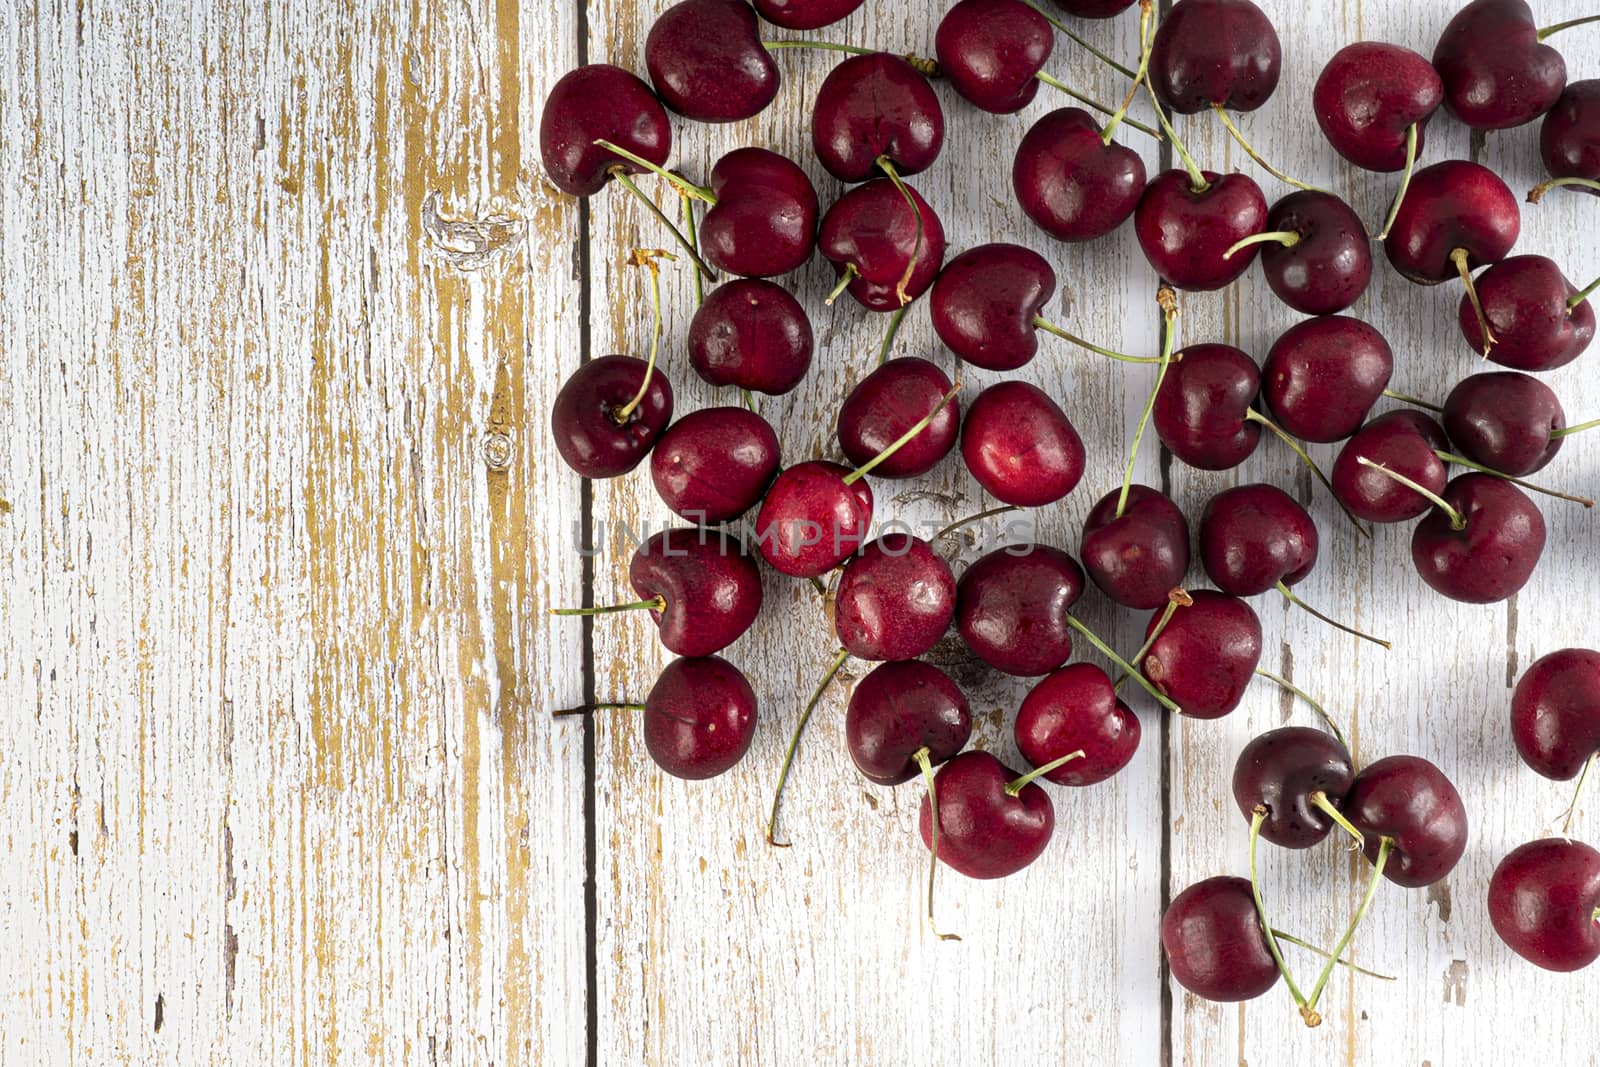 Cherries on wooden background by Nawoot